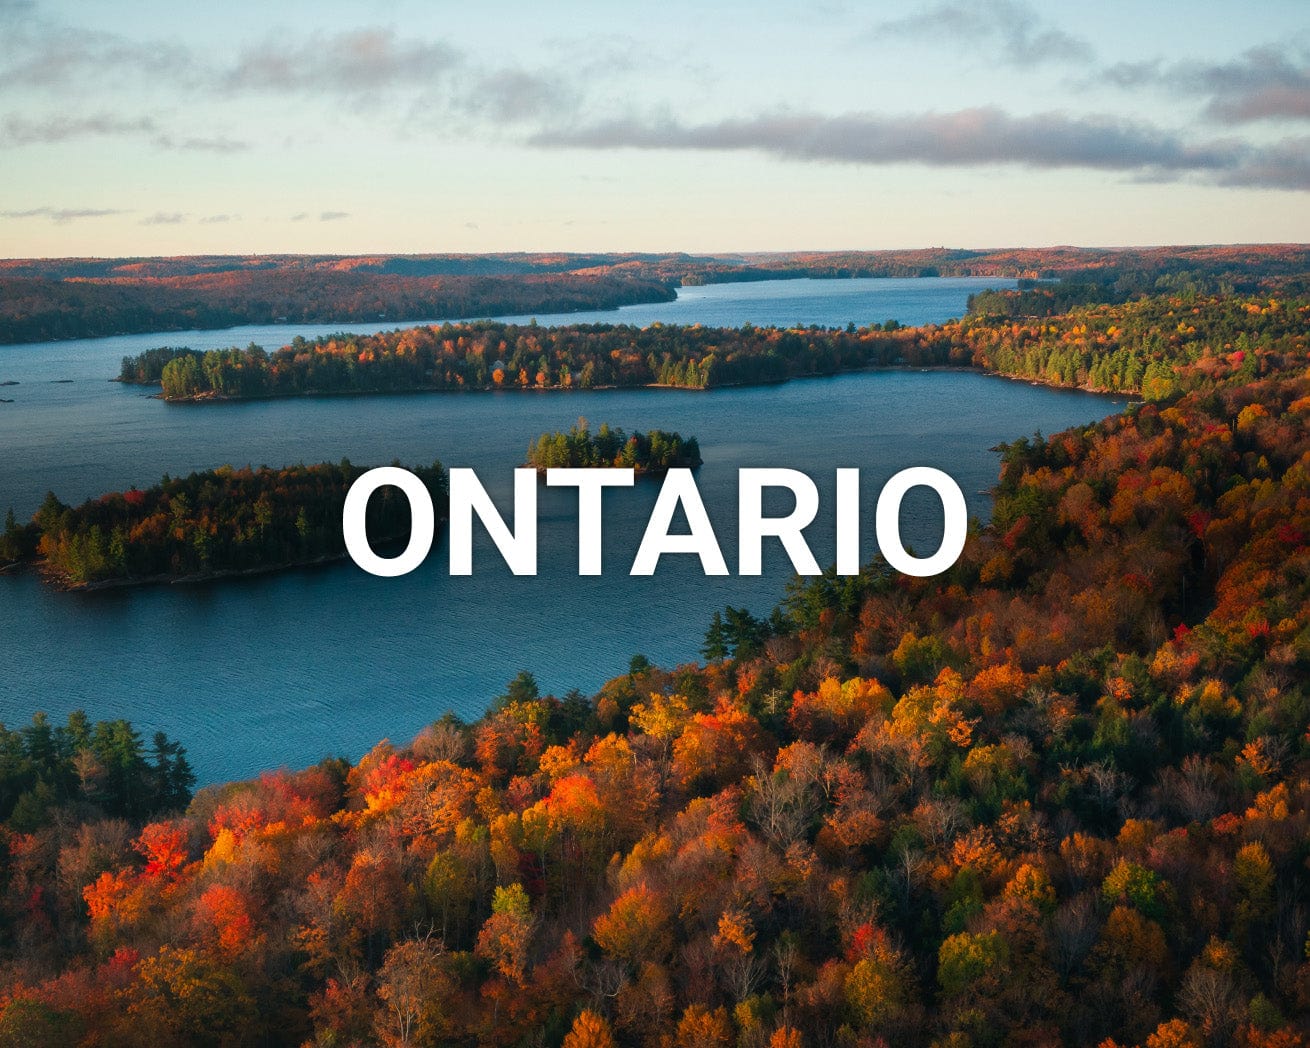 Ontario landscape - forests and lake